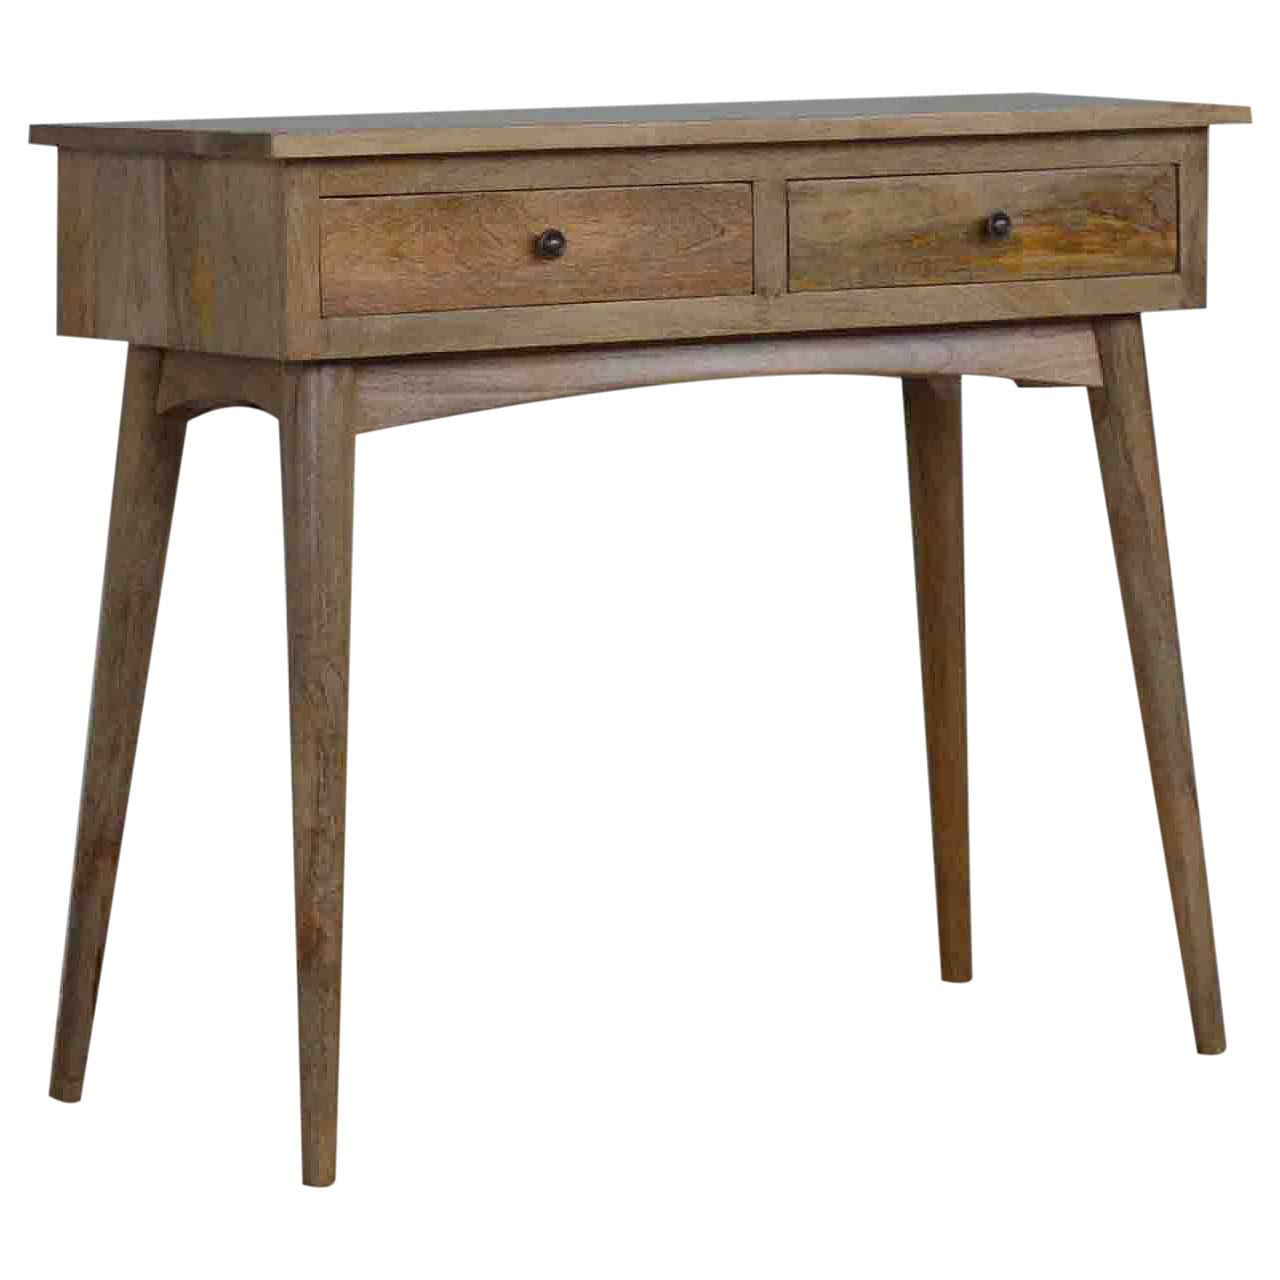 Solid Wood 2 Drawer Console Table | Scottish Antique Regarding 2 Drawer Console Tables (View 11 of 20)